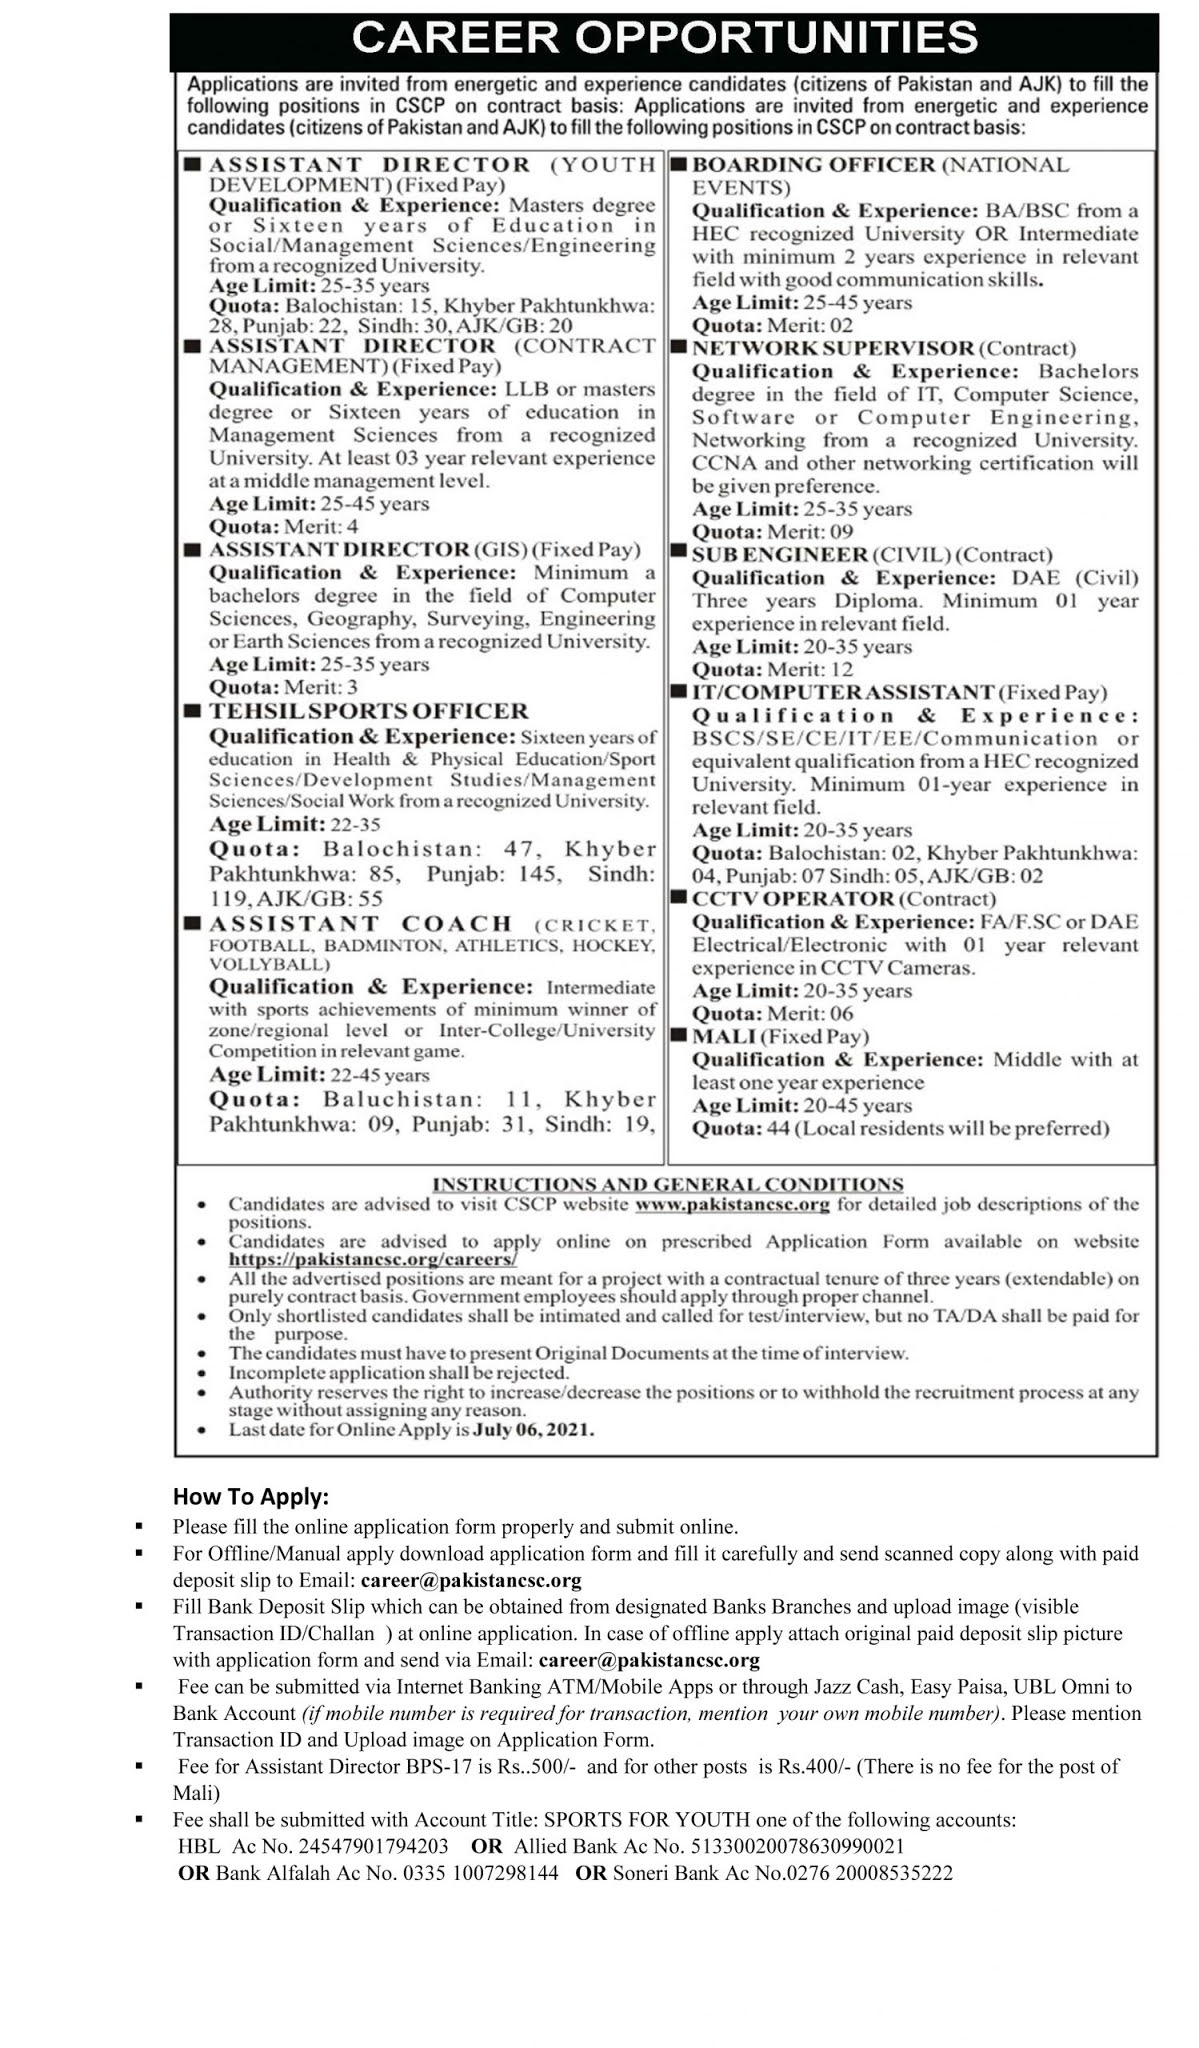 Community Sports Council Pakistan (CSCP) Announced Government Jobs for the posts of Assistant director, IT Assistant, etc. in June 2021